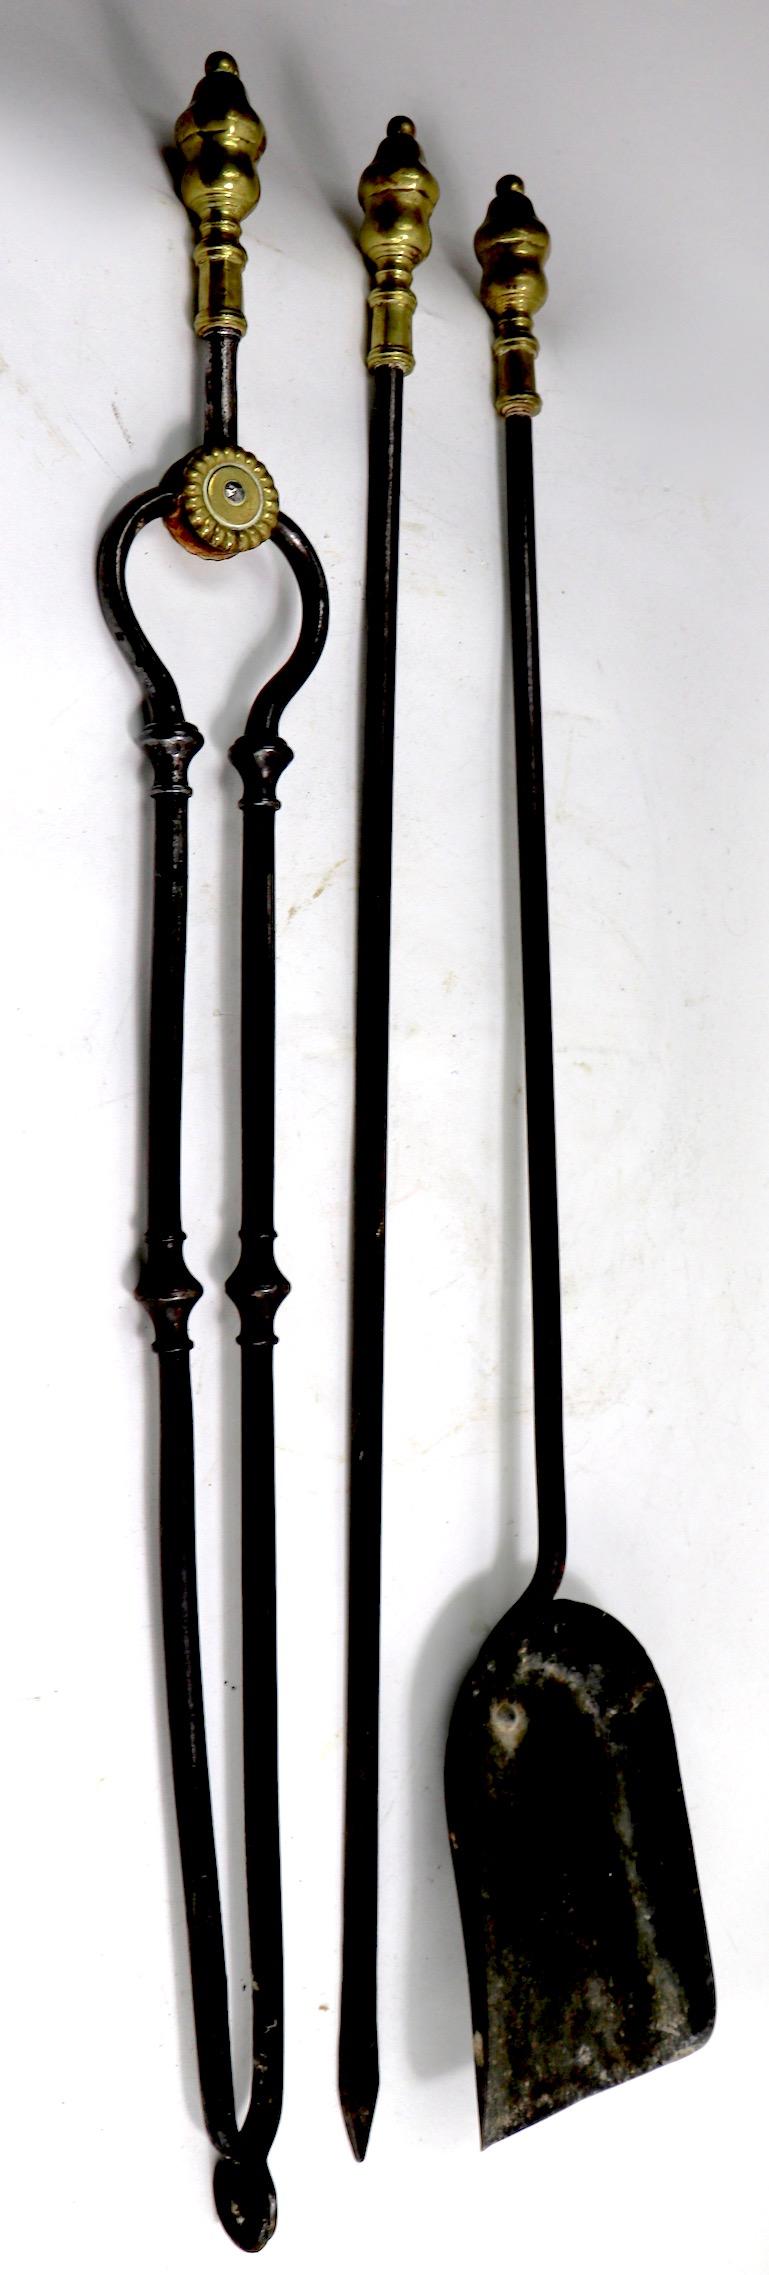 Hand forged iron, and cast brass fireplace tool set to include stand, tongs, poker, and shovel. Well crafted, substantial set, in original, clean and ready to use condition. We believe this set is English in origin, however it is unsigned.